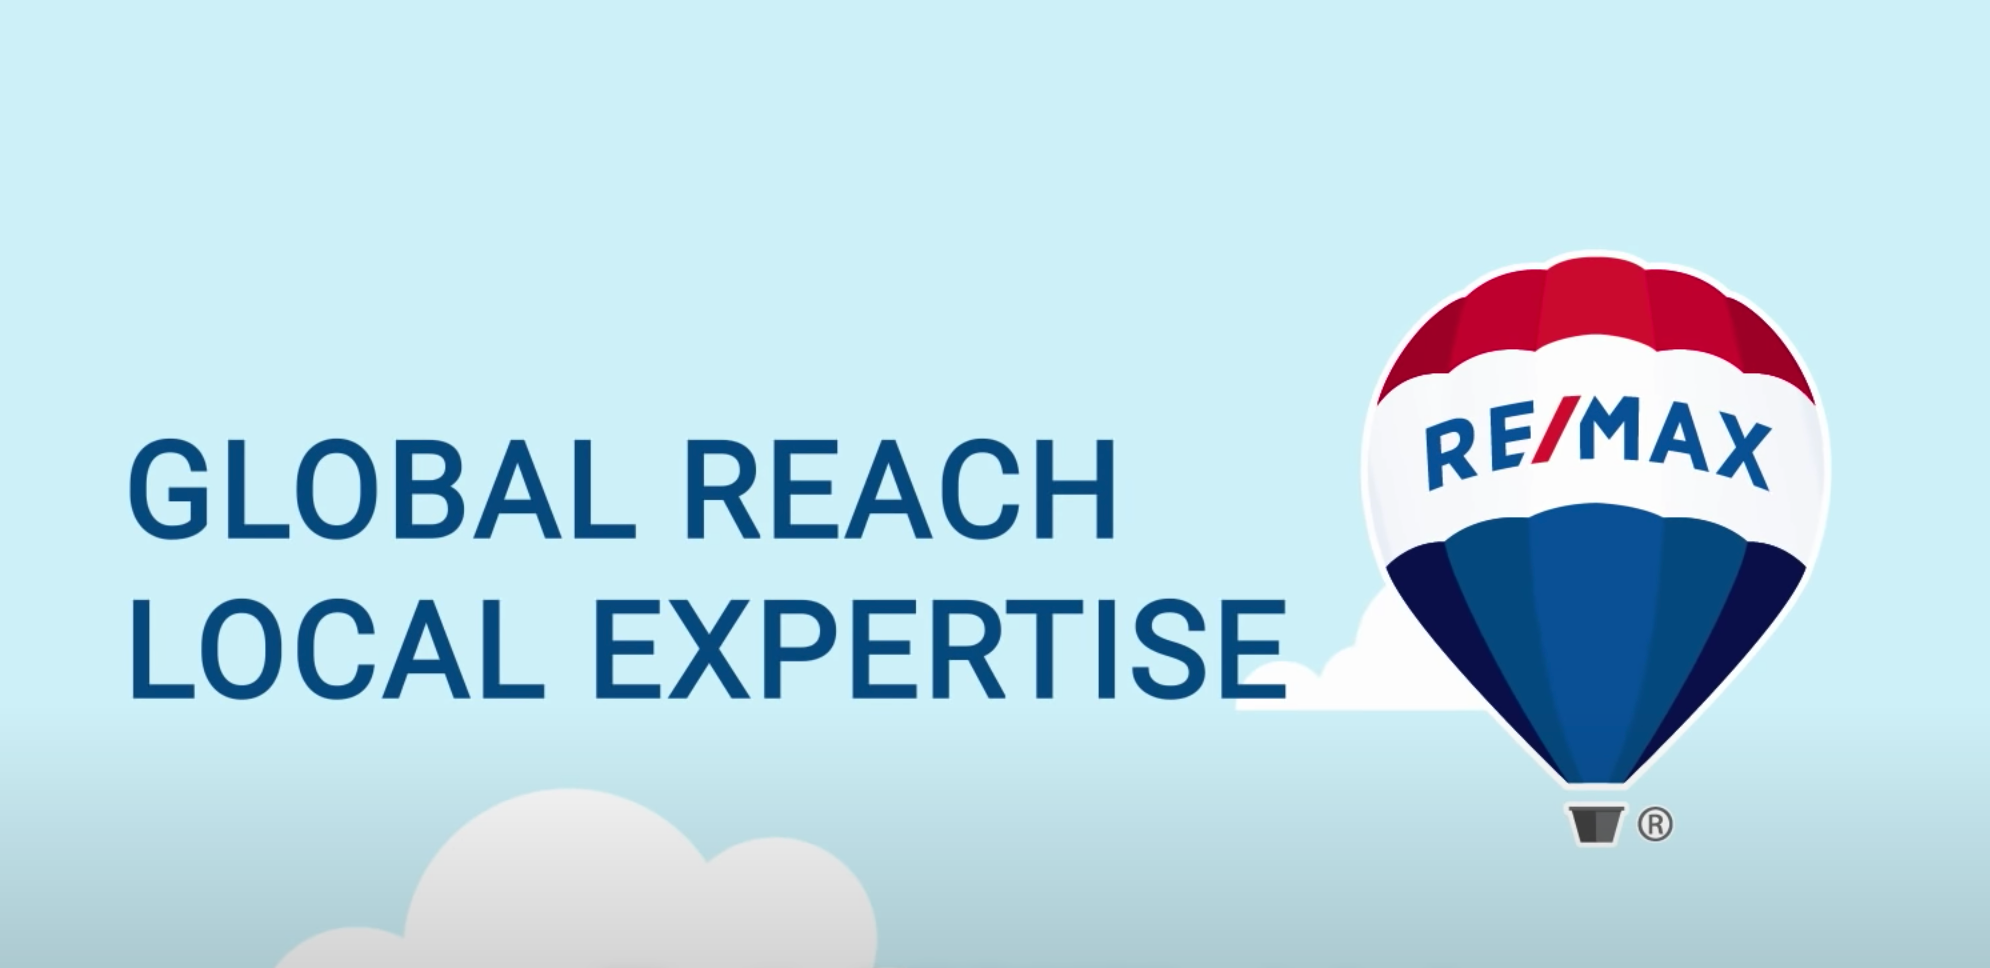 Why Sell With RE/MAX